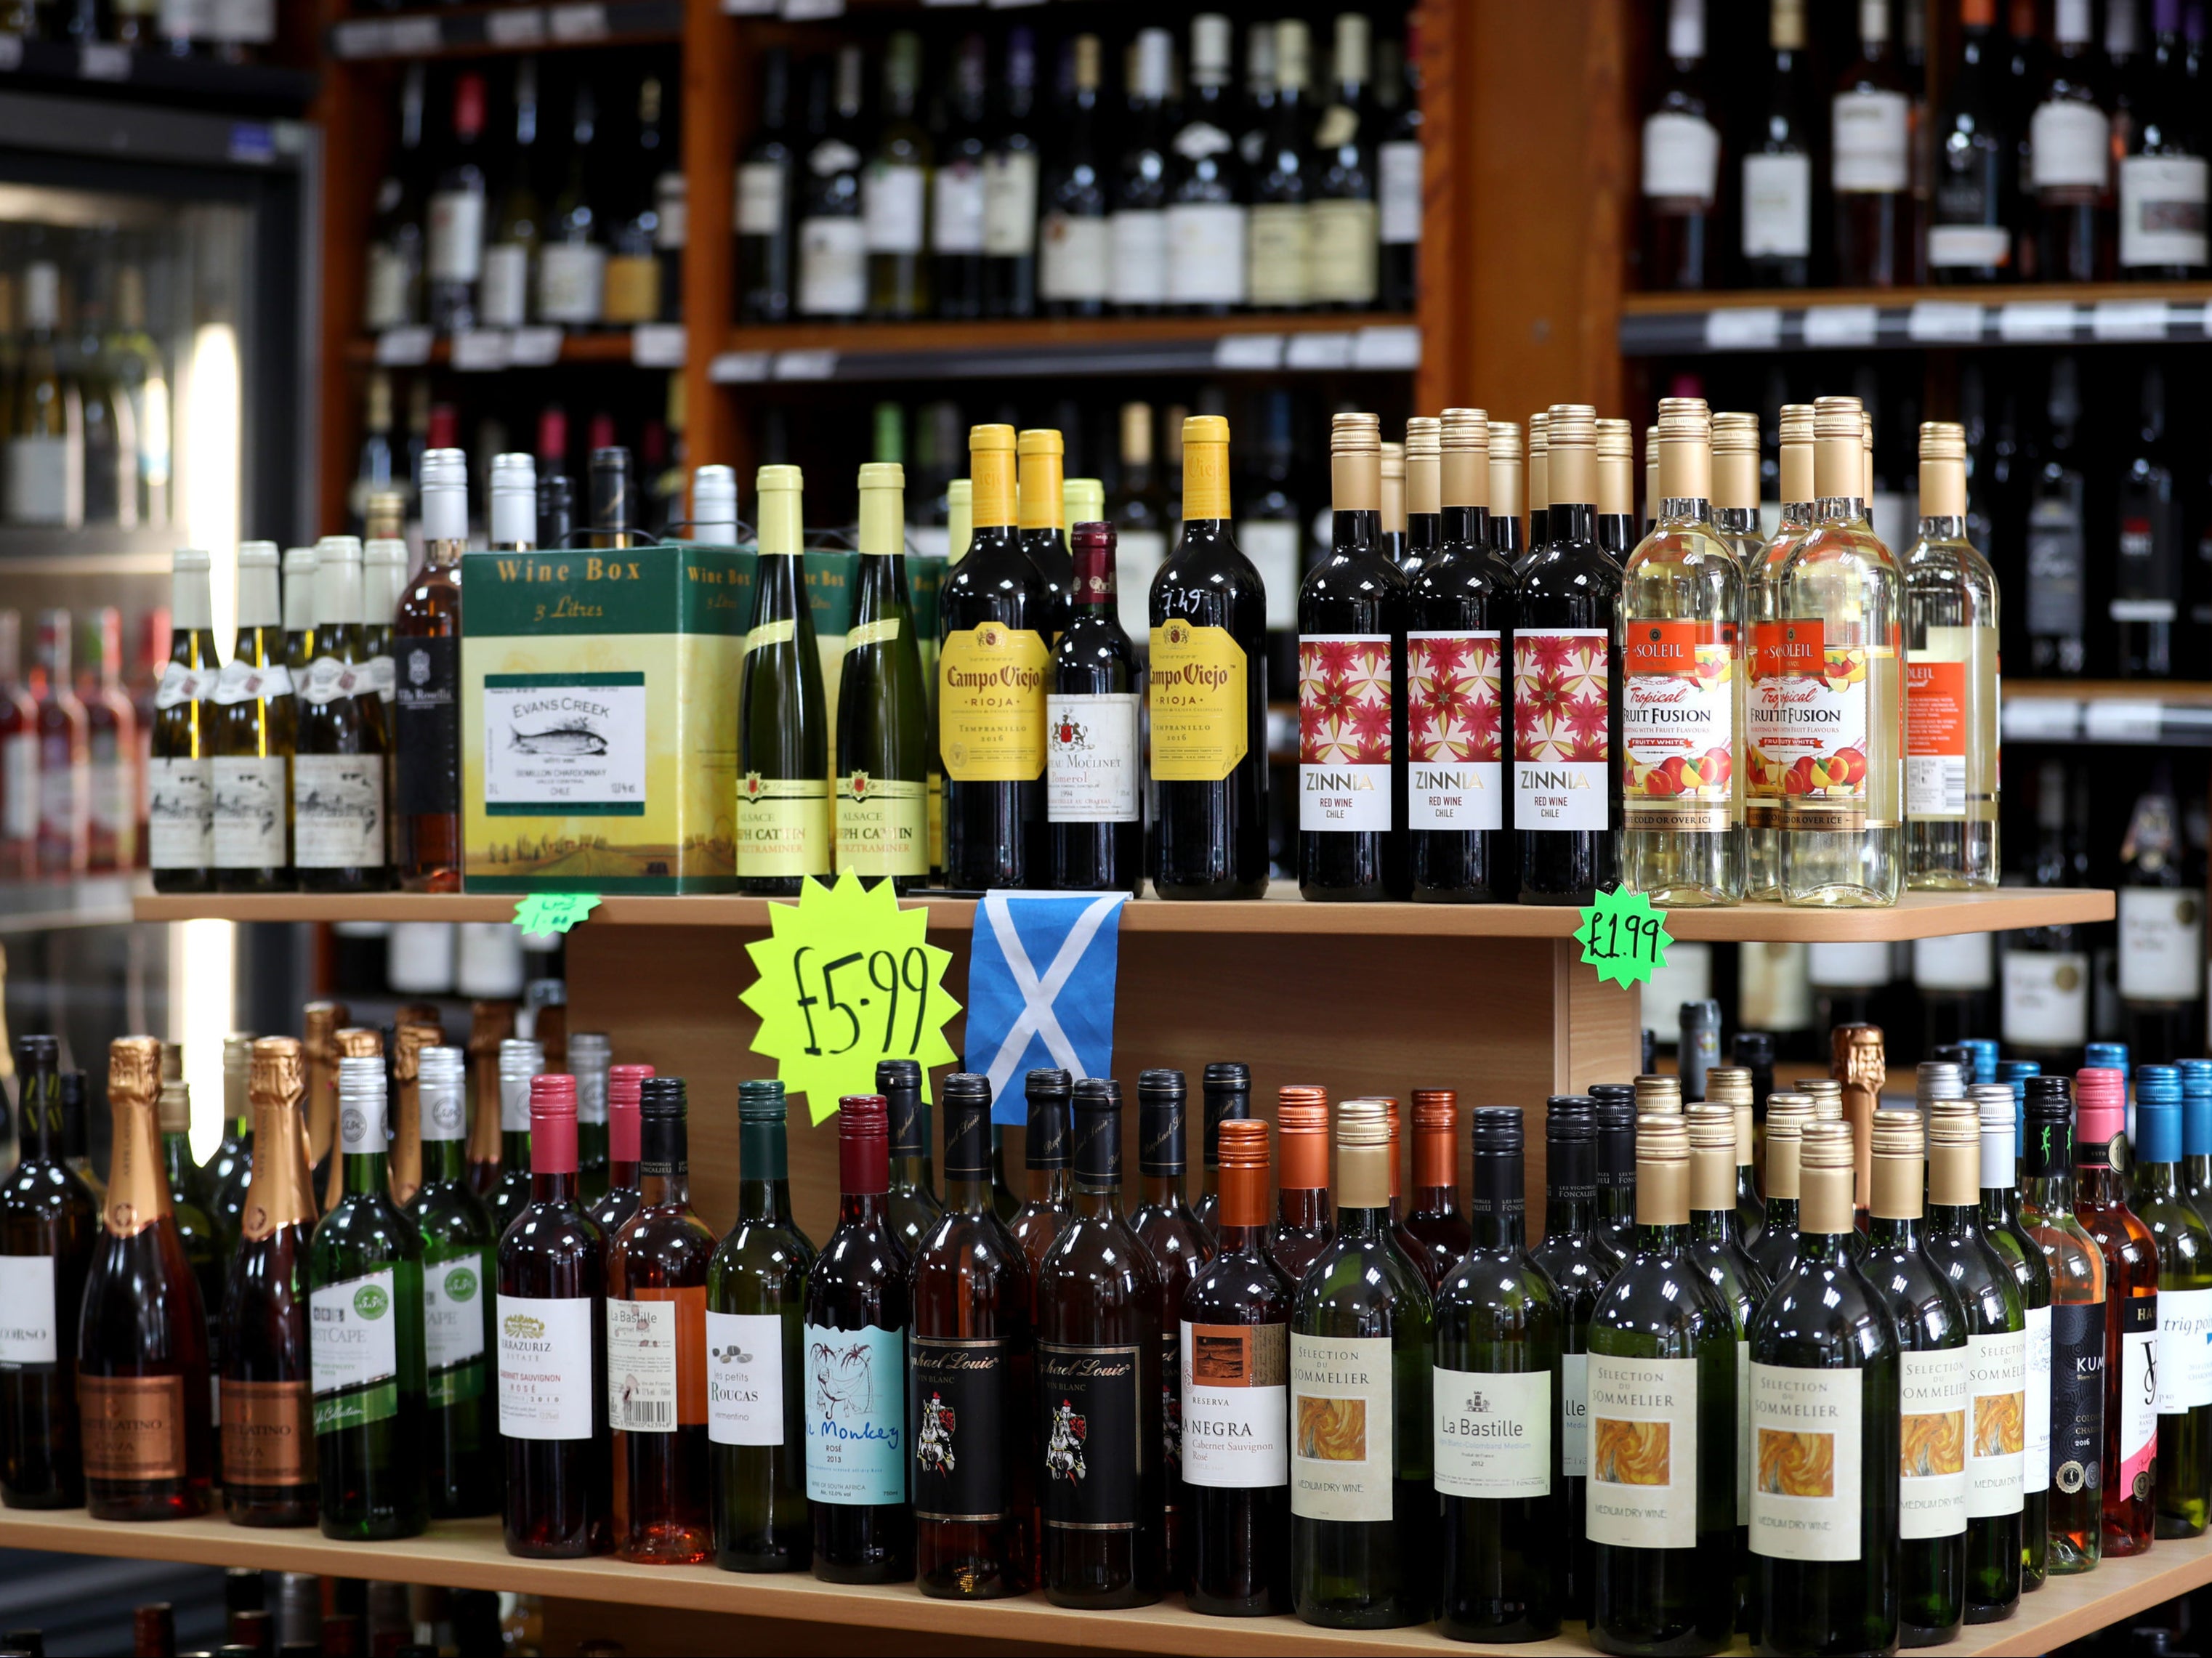 Scotland became the first country in the world to bring in minimum unit pricing (MUP) for alcohol in May 2018